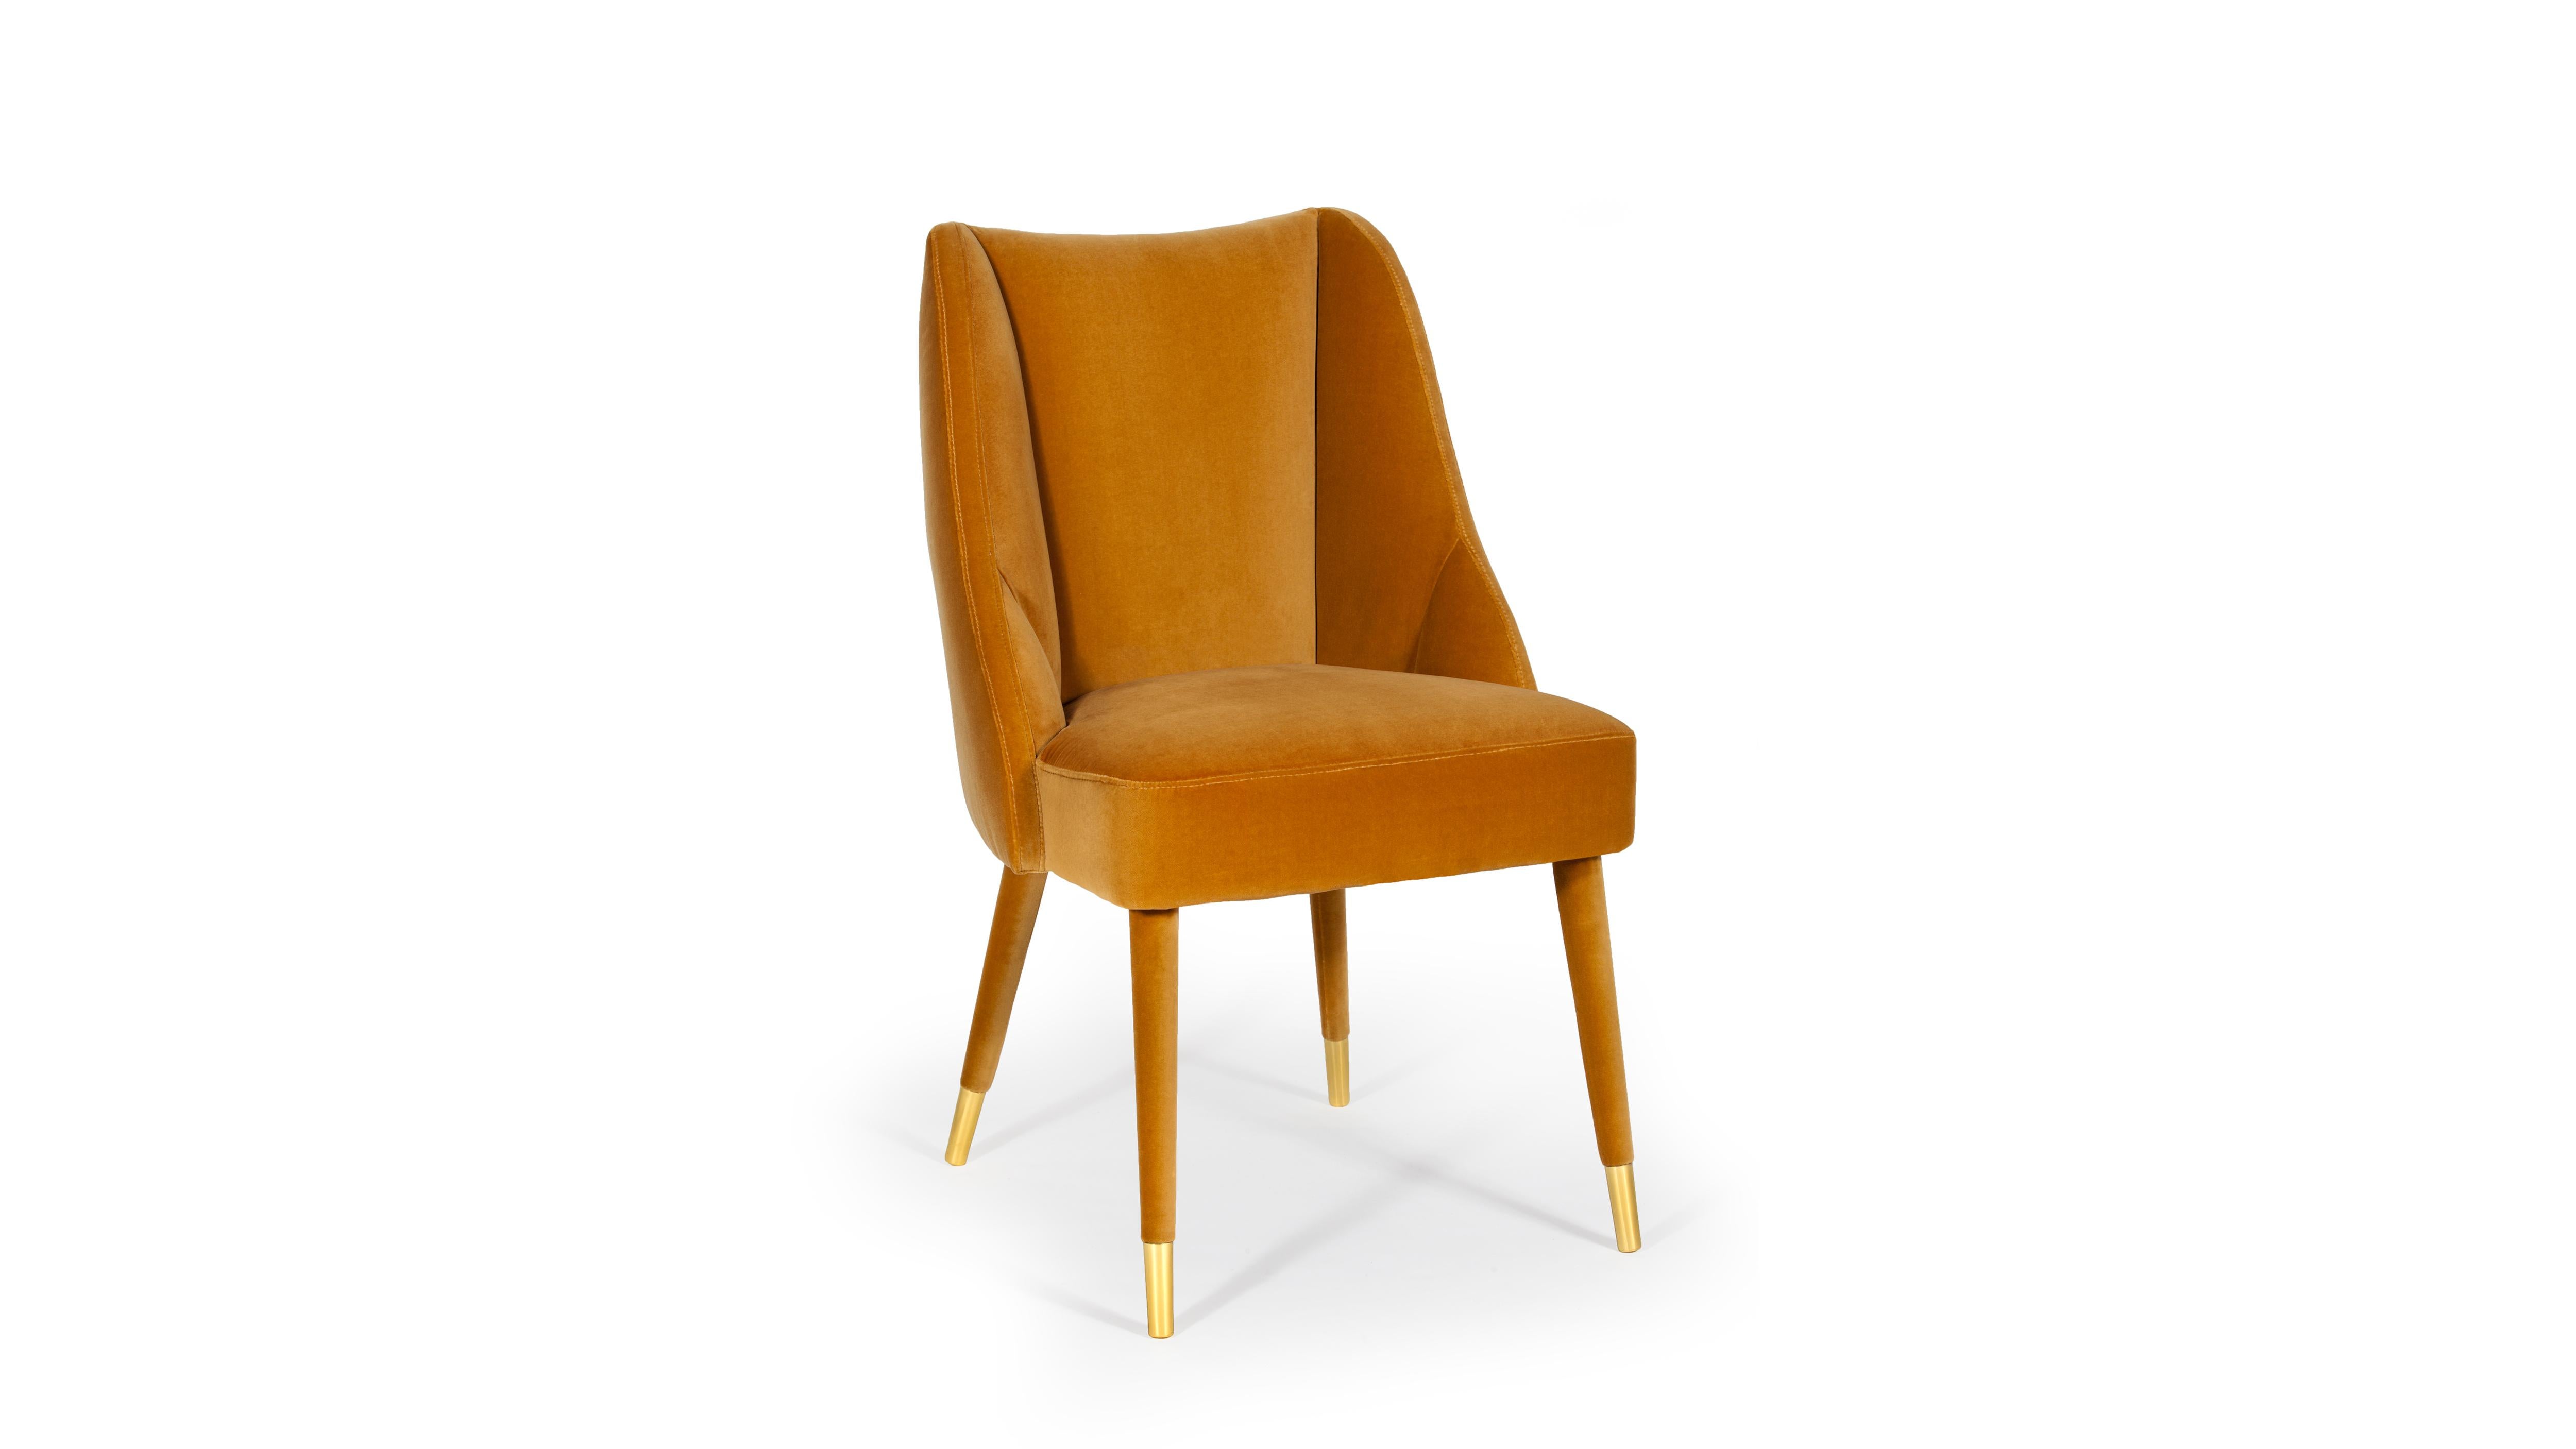 Figueroa Dining Chair by InsidherLand
Dimensions: D 62 x W 56 x H 90 cm.
Materials: Polished brass, InsidherLand Cotton Velvet ref. 0166 fabric.
11 kg.
Available in different fabrics.

Located in the sunny California on the south-west of the United